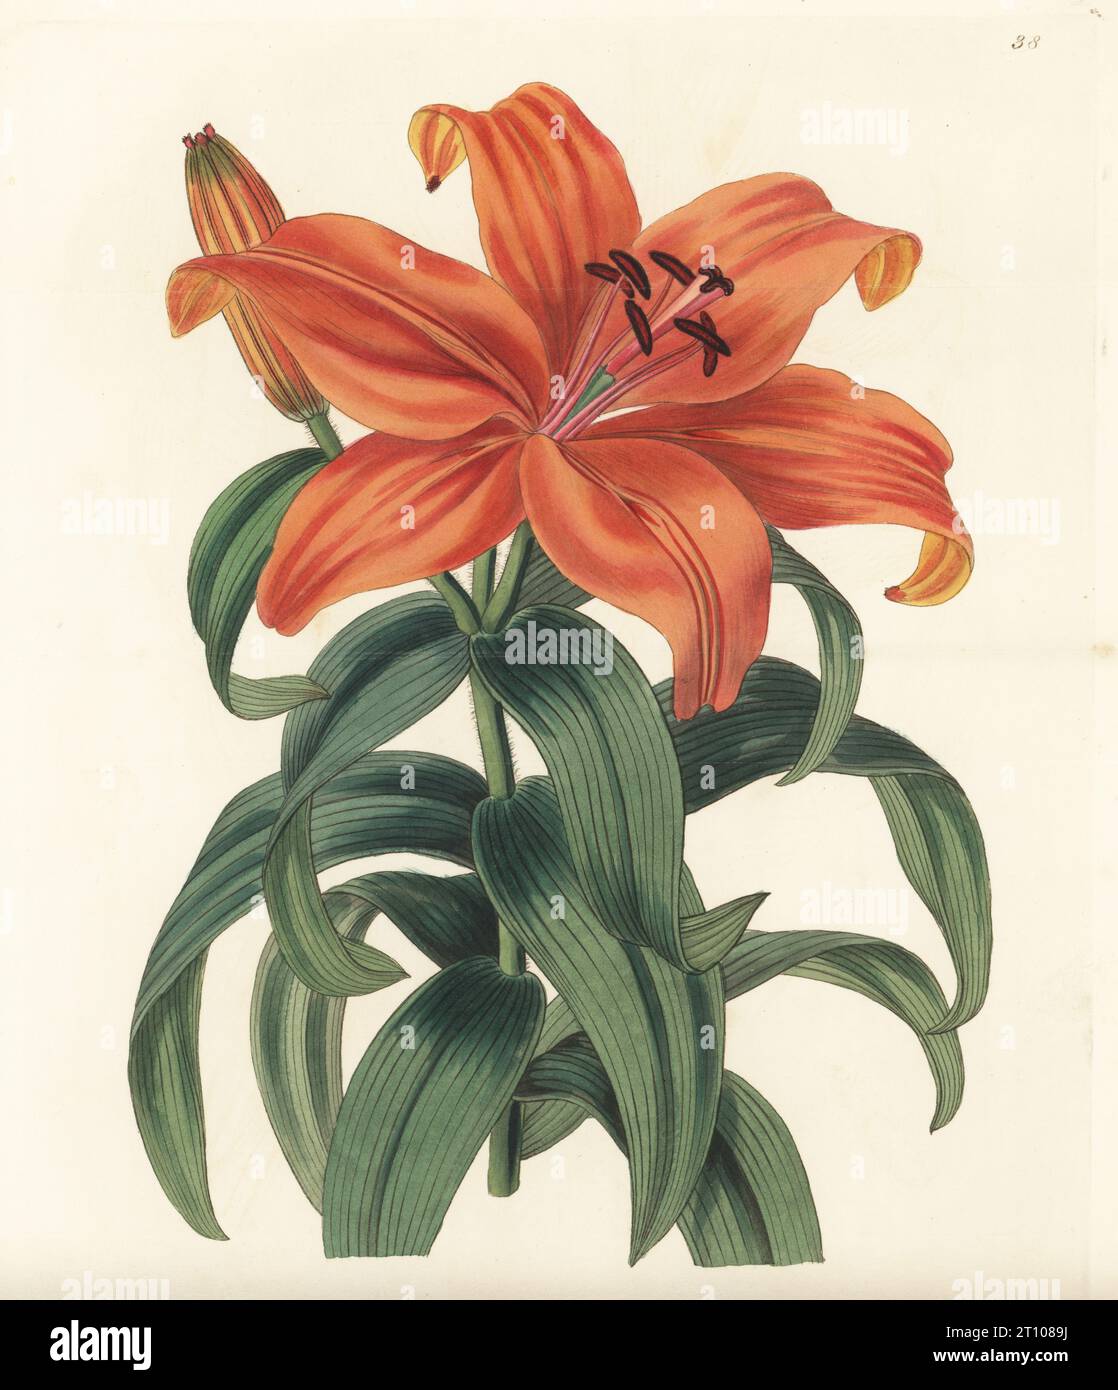 Japanese lily or sukashi yuri, Lilium maculatum var. maculatum. Thunberg's orange lily, Lilium thunbergianum. Native to Japan, introduced to Europe by German botanist Philipp Franz von Siebold. Handcoloured copperplate engraving by George Barclay after a botanical illustration by Sarah Drake from Edwards’ Botanical Register, edited by John Lindley, published by James Ridgway, London, 1839. Stock Photo